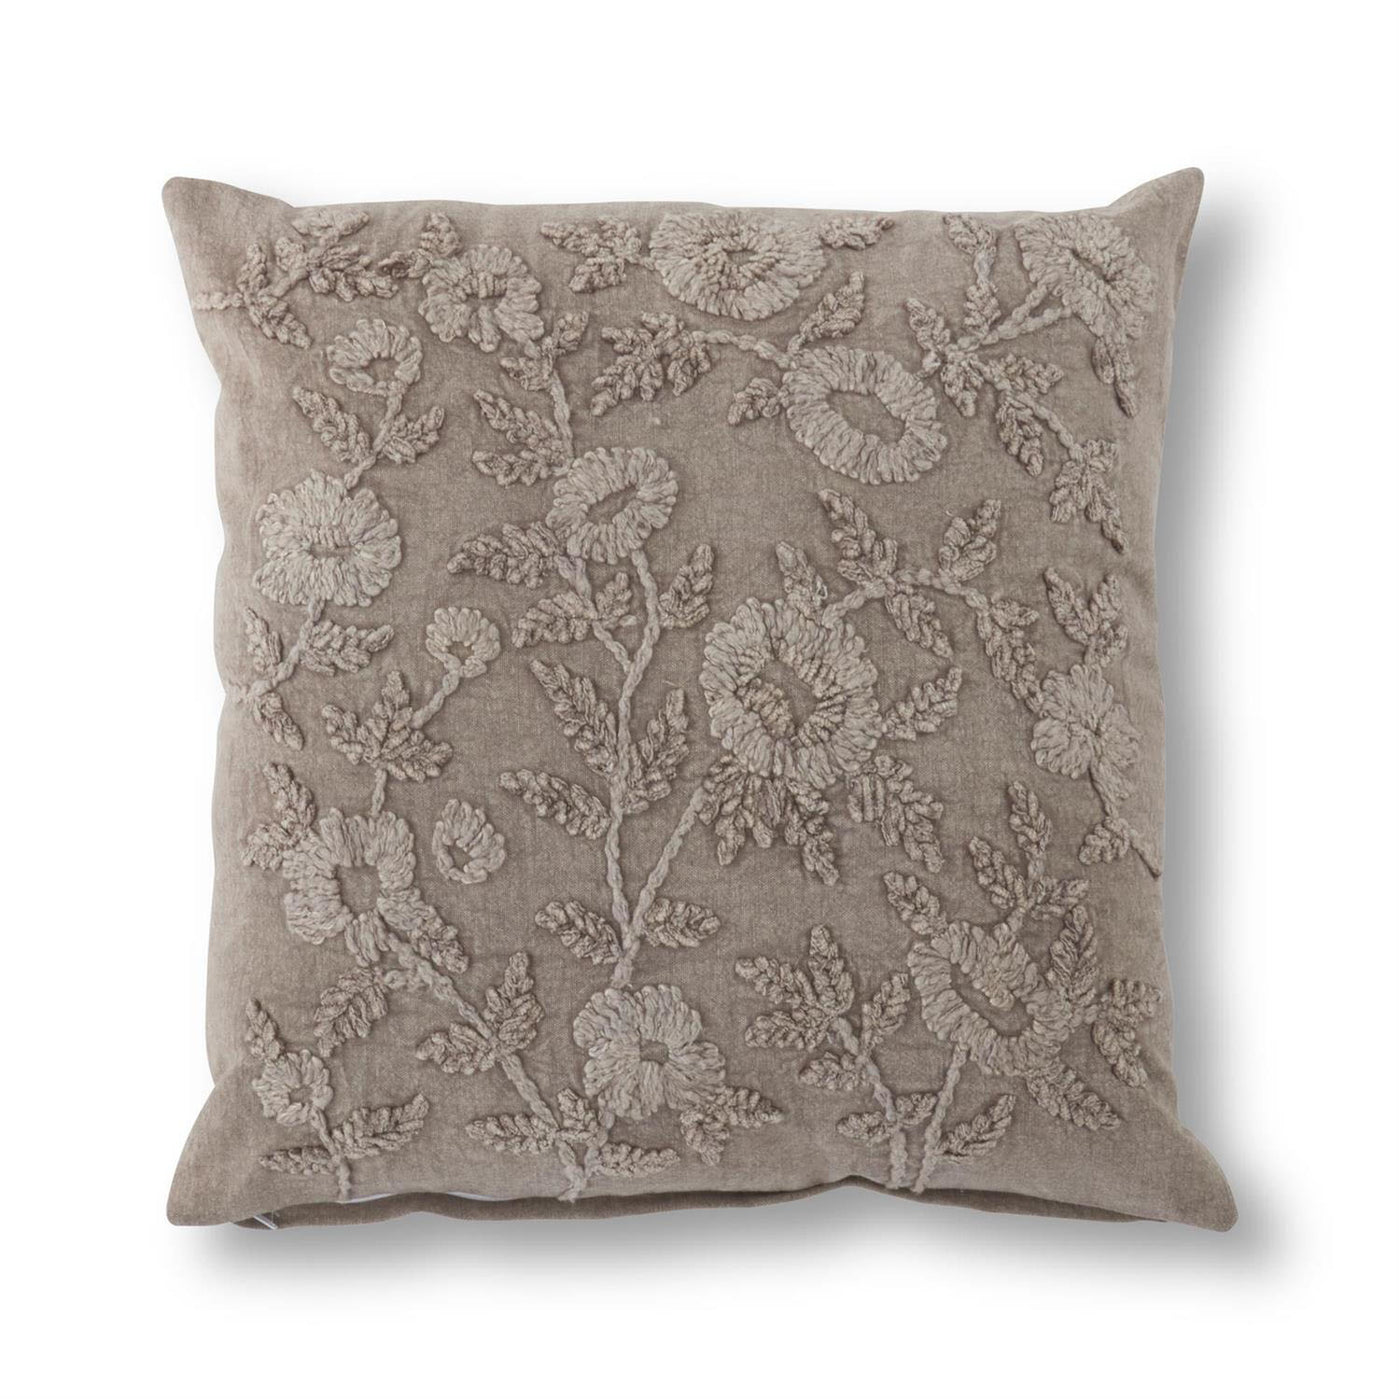 20" Stonewashed Taupe Embroidered Pillow